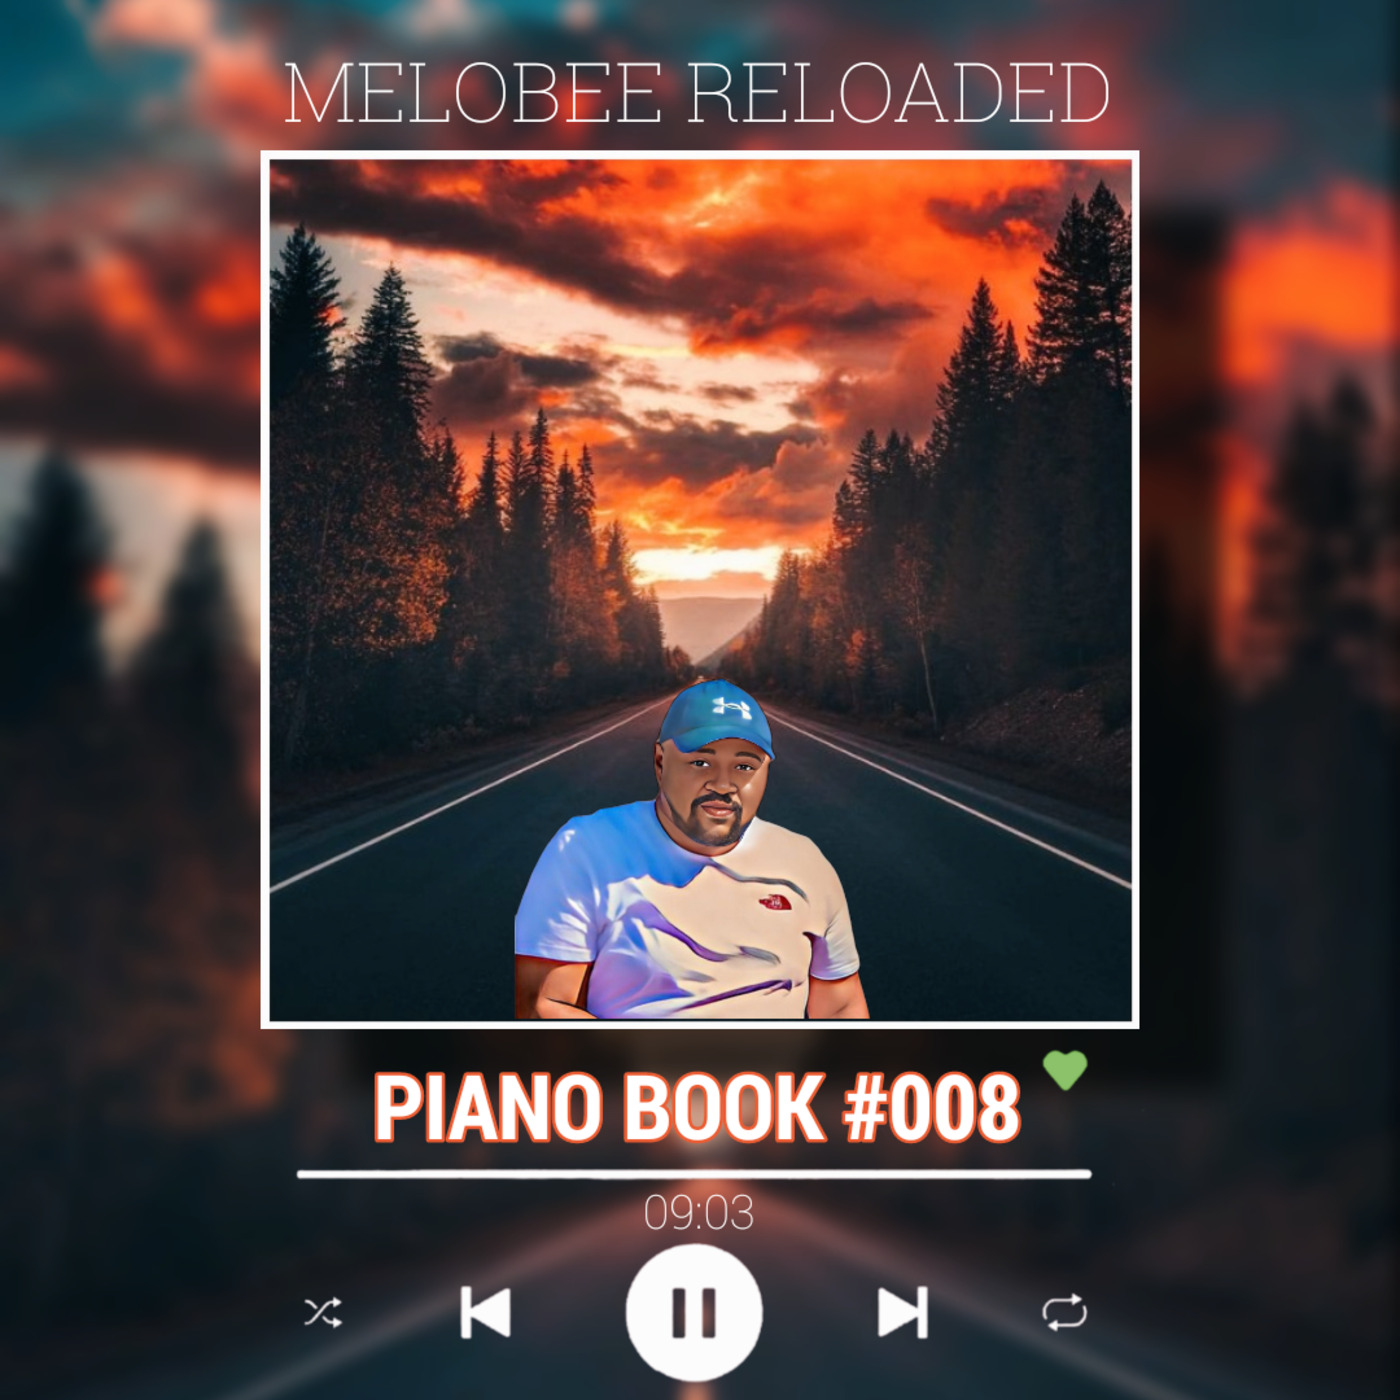 Melobee Reloaded - Piano Book #008